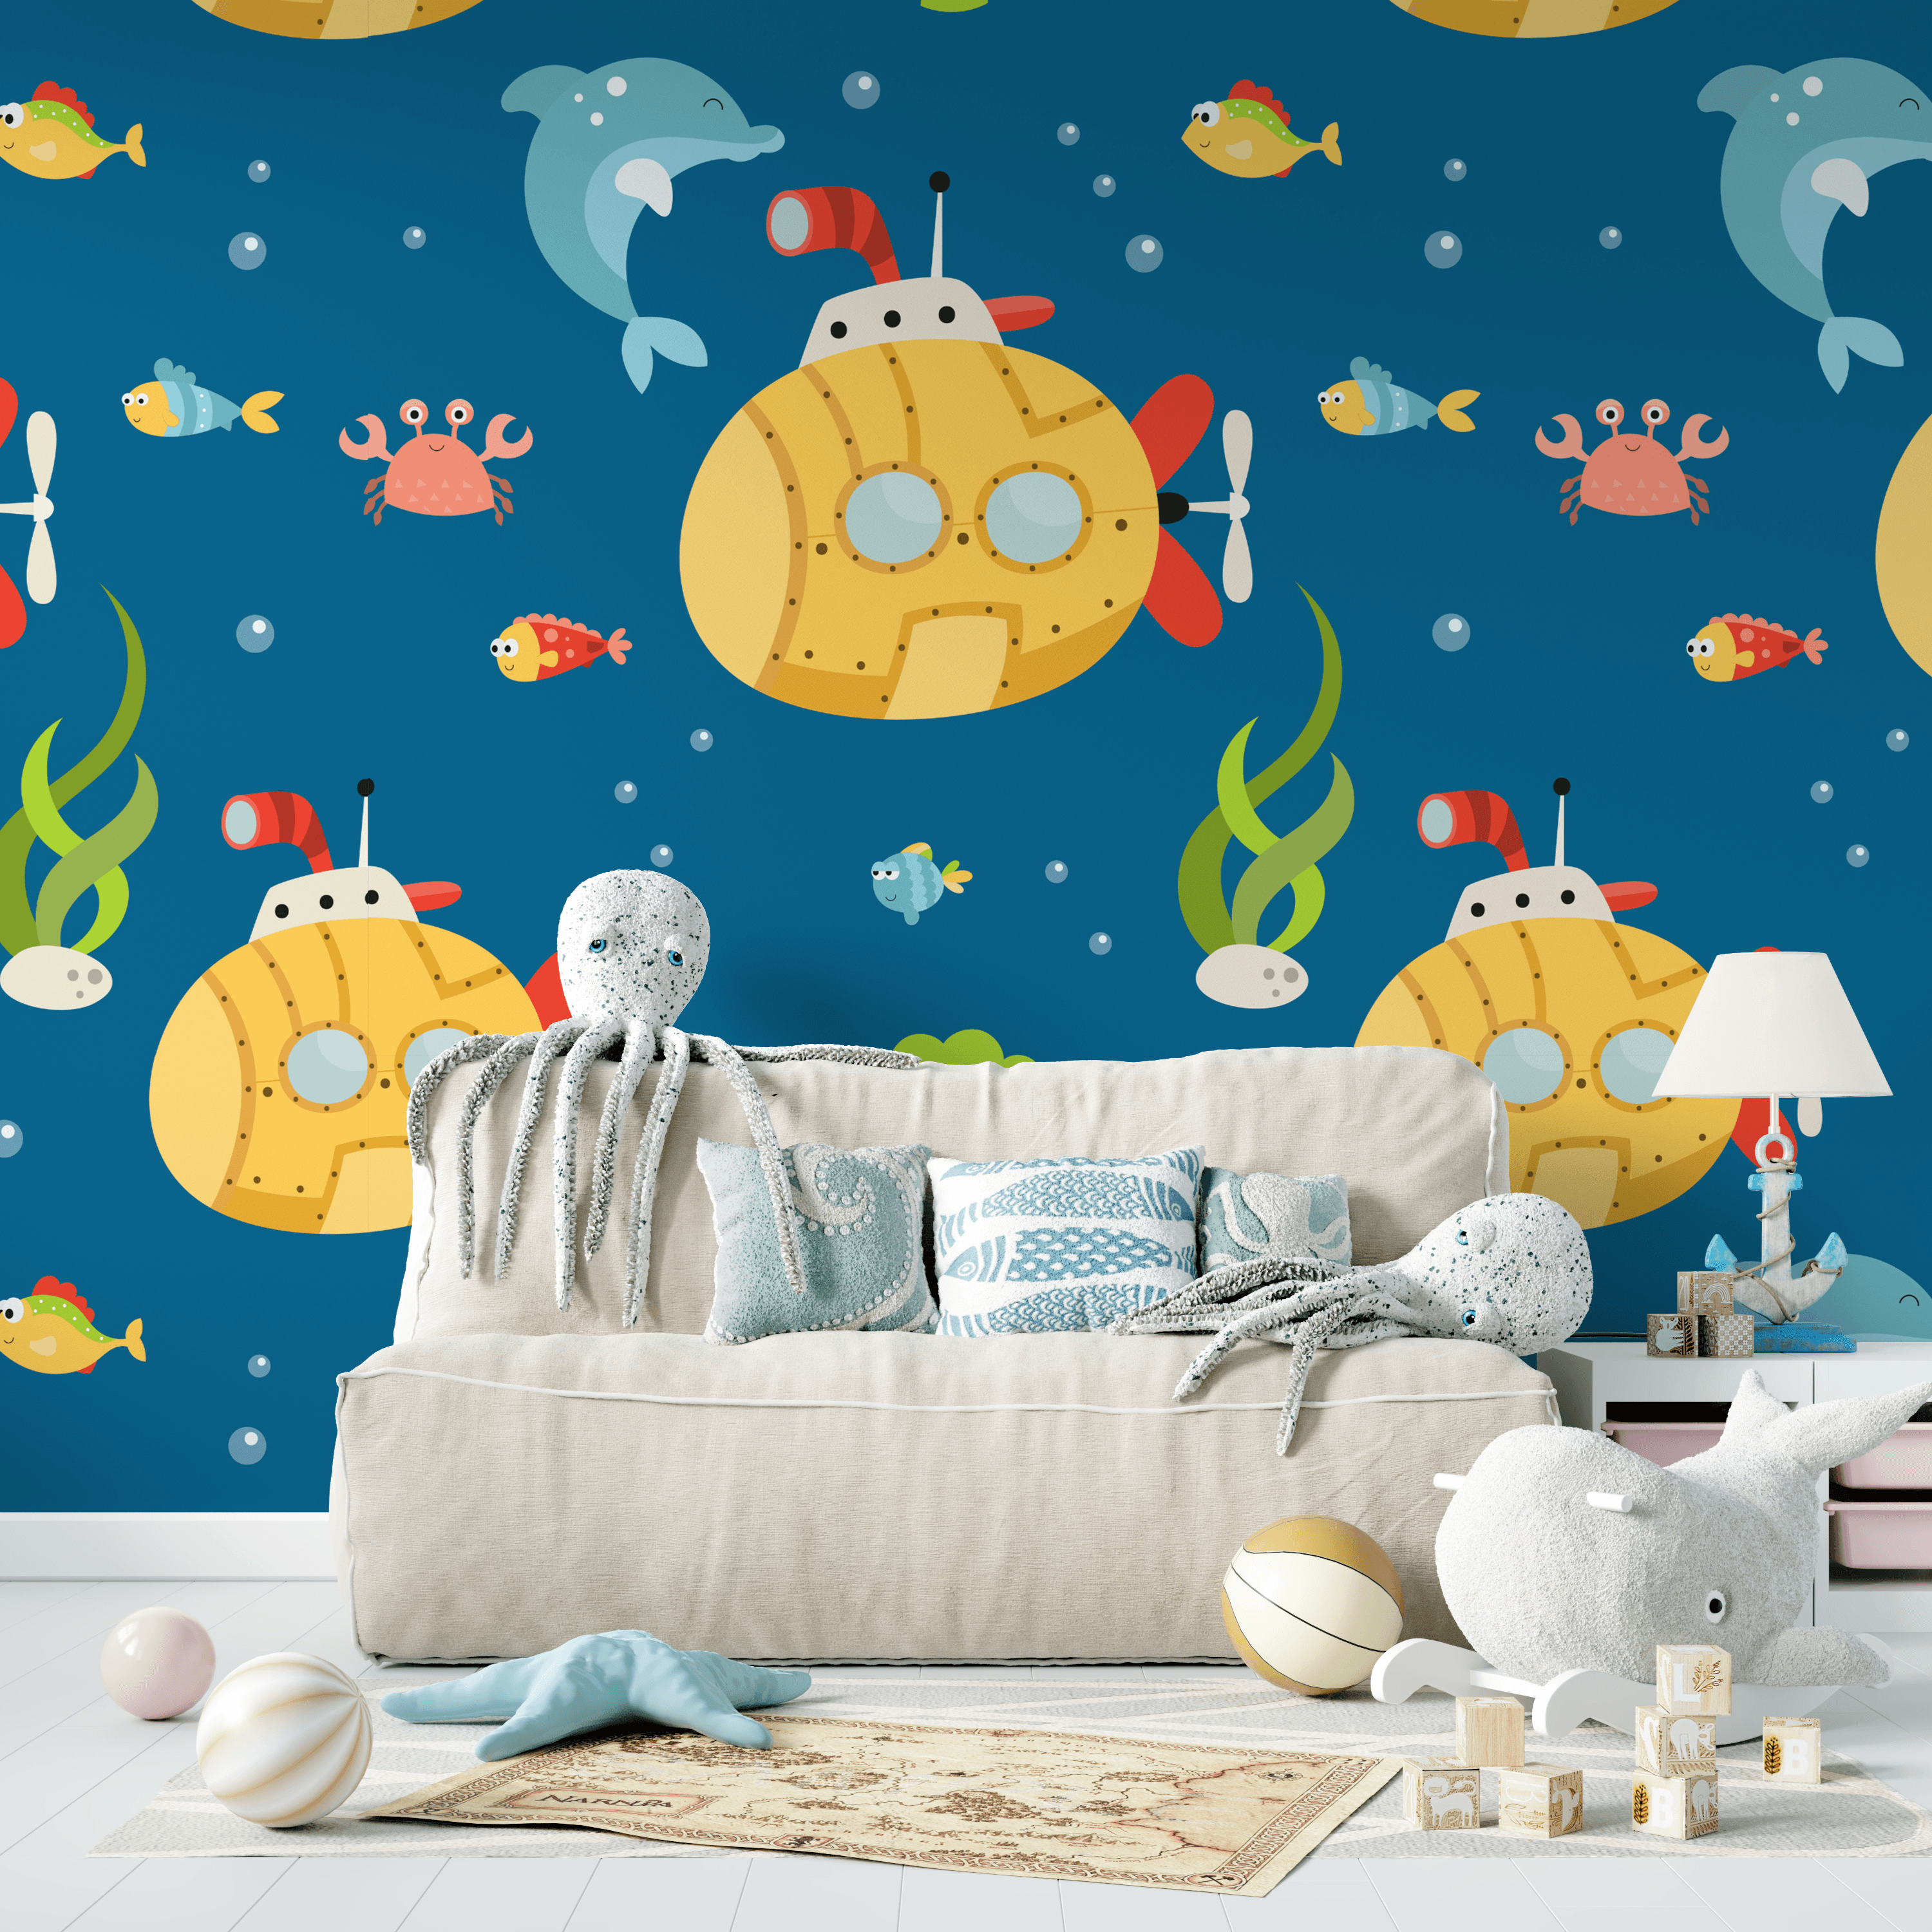 Transform Your Child's Room with Wallpaper: Top 5 Themes for 2023 - The Ditzy Dodo